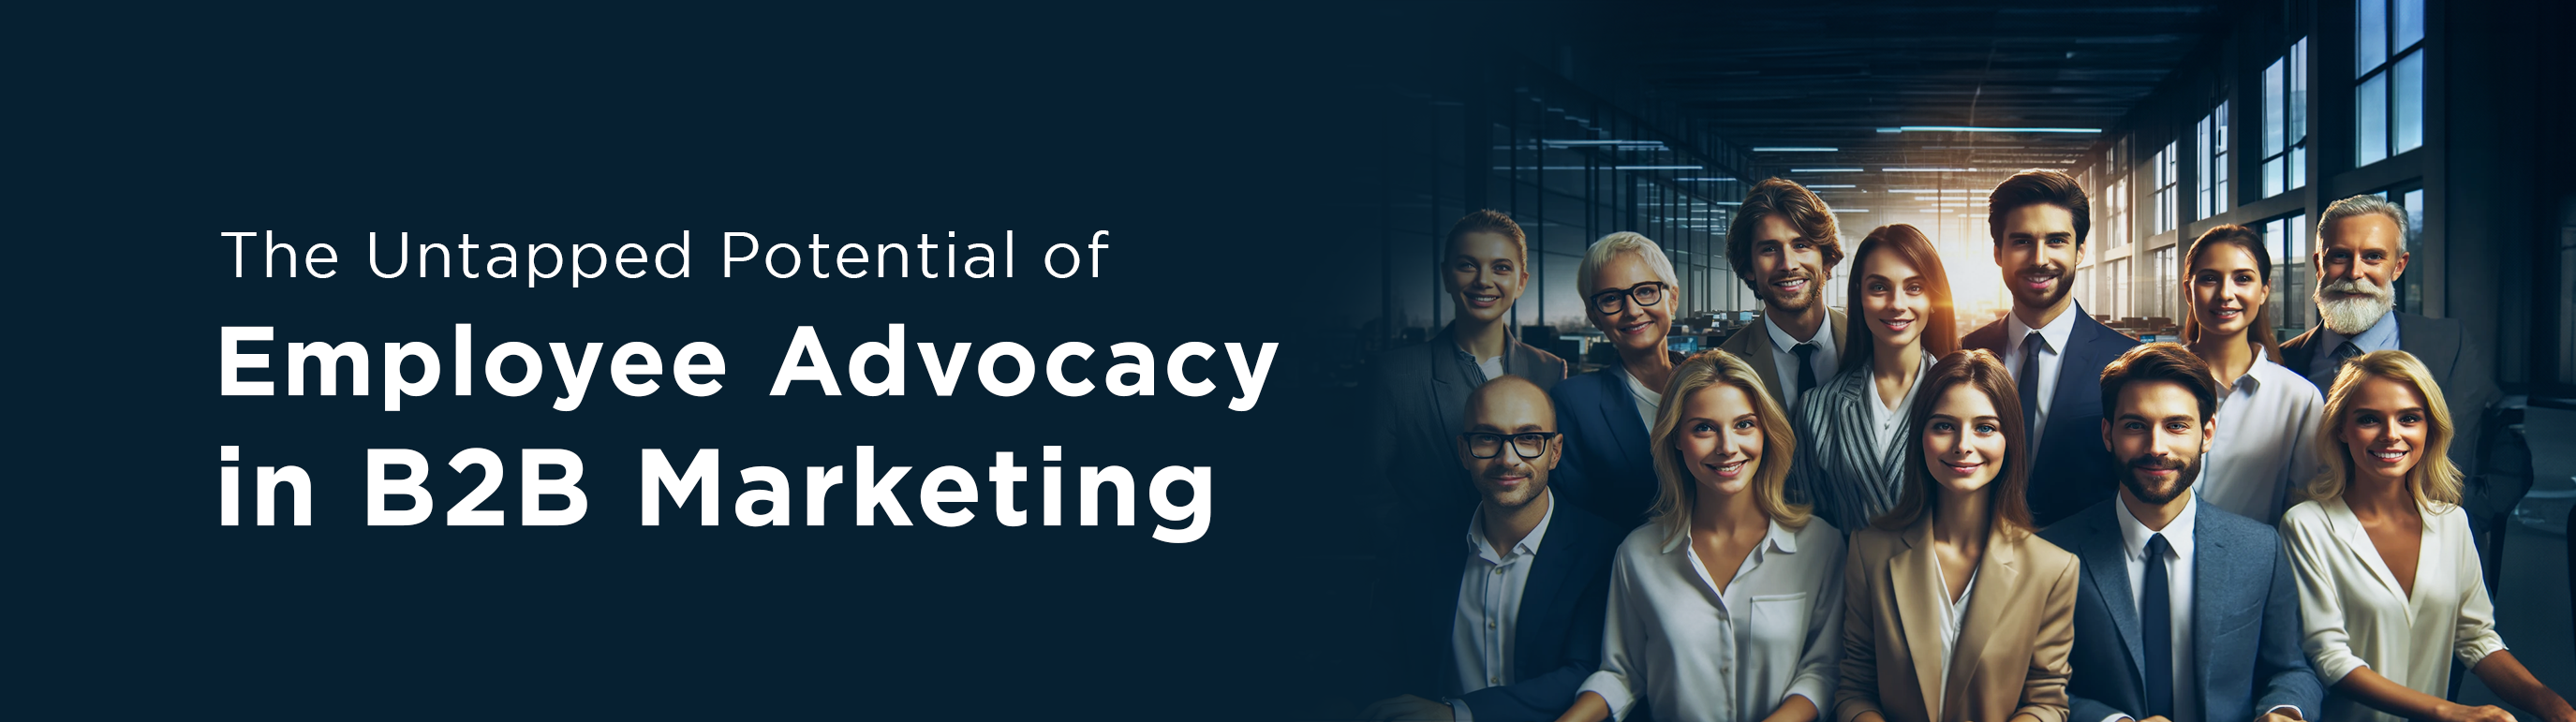 The Untapped Potential of Employee Advocacy in B2B Marketing